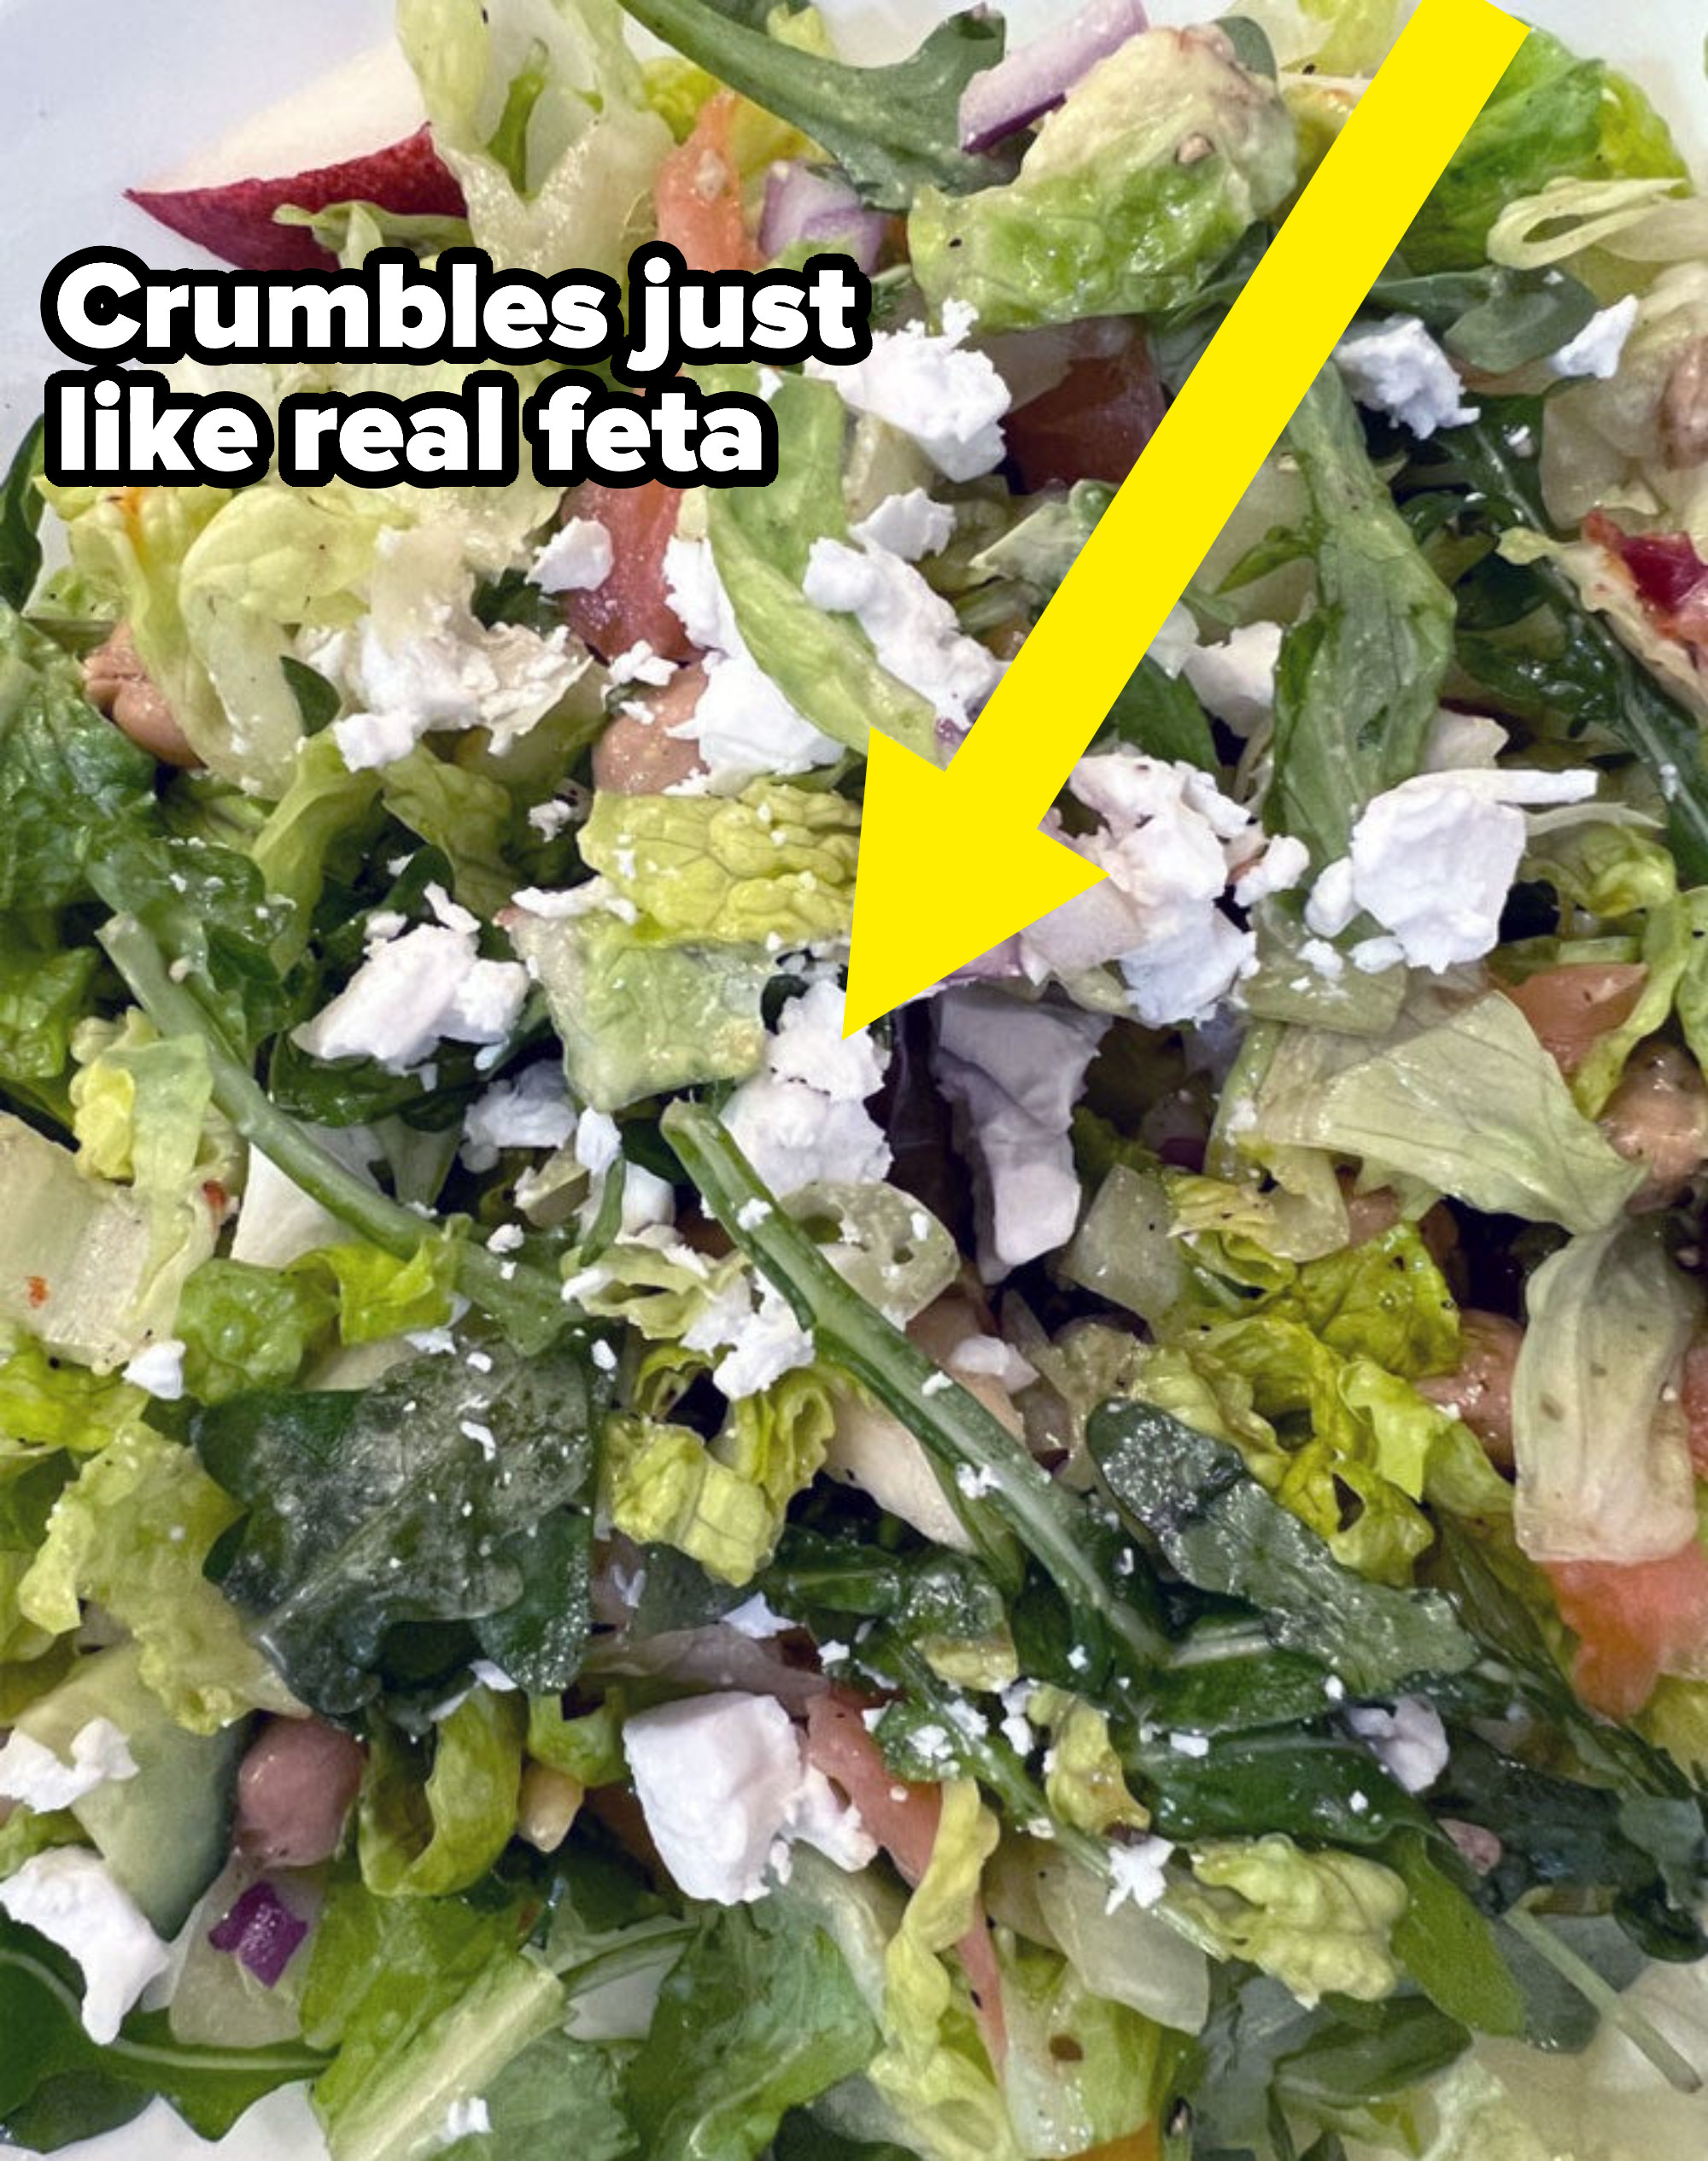 A salad with crumbled feta cheese.